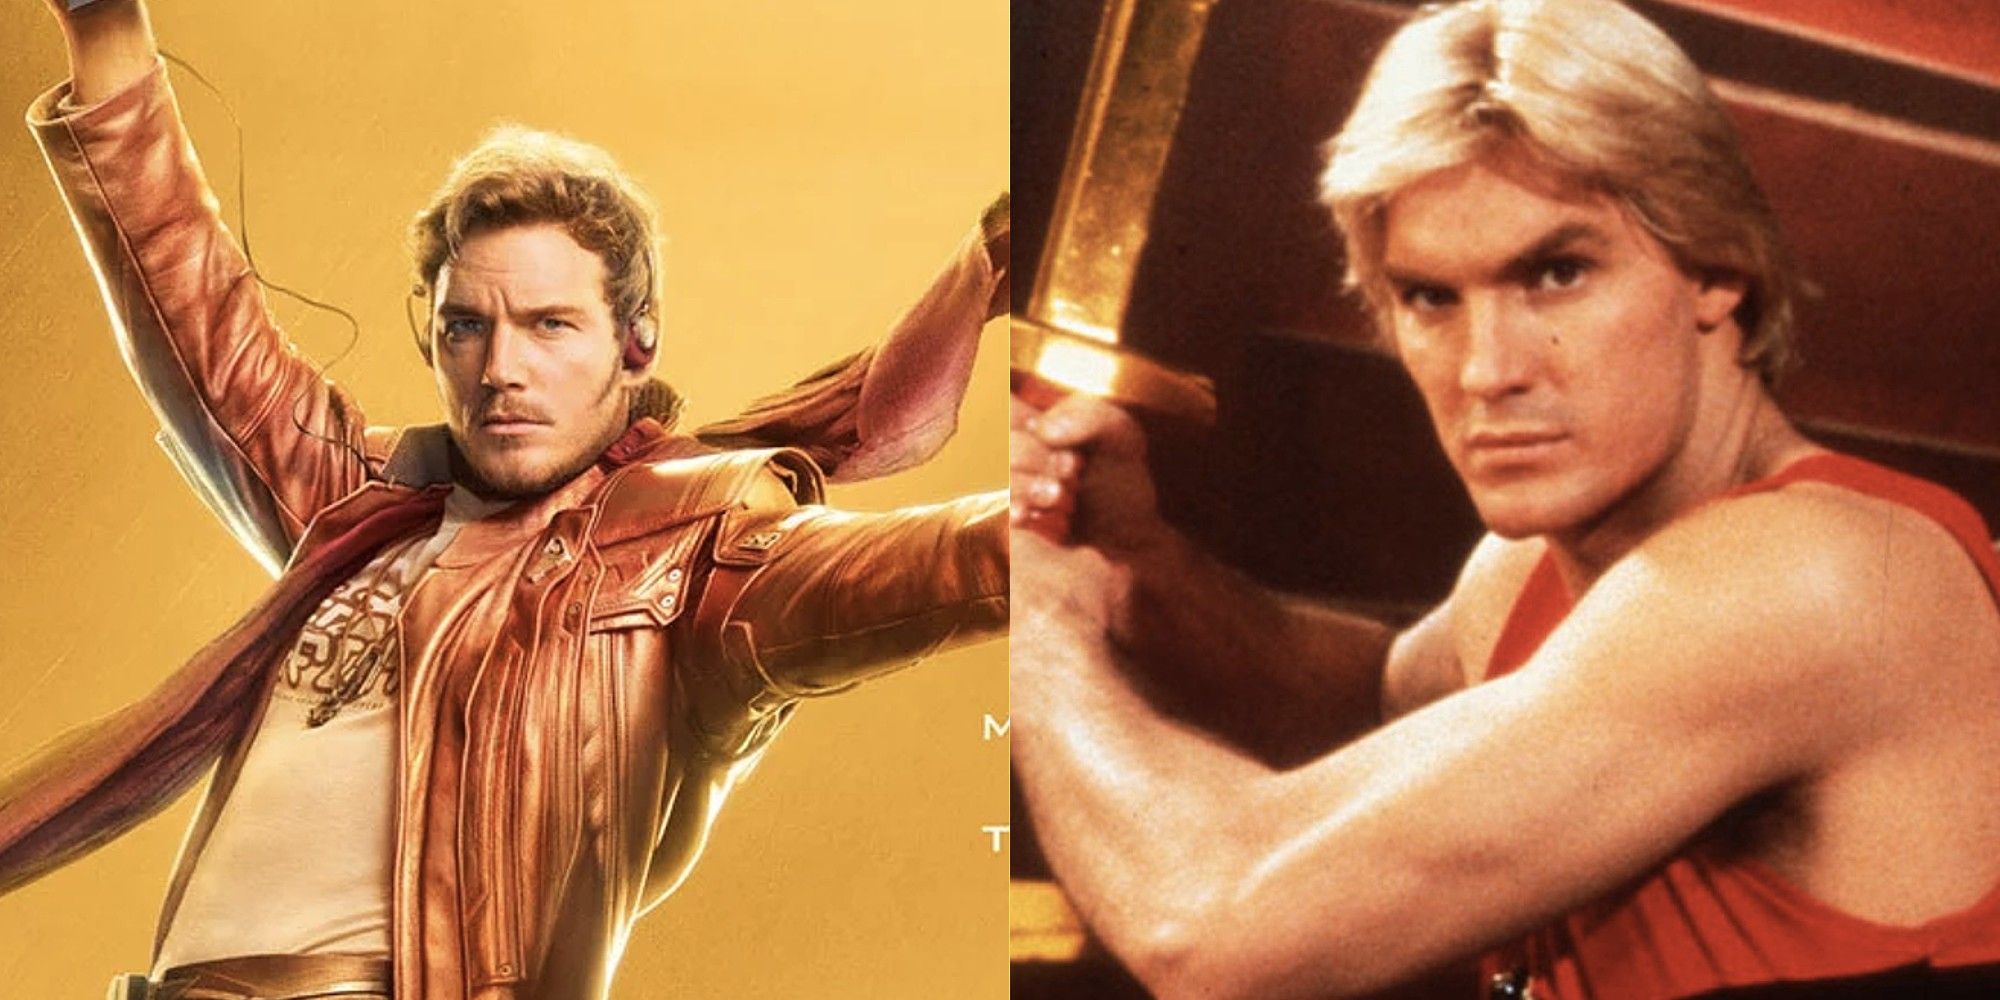 Left to right: Peter Quill from Guardians of the Galaxy and Flash Gordon from Flash Gordon